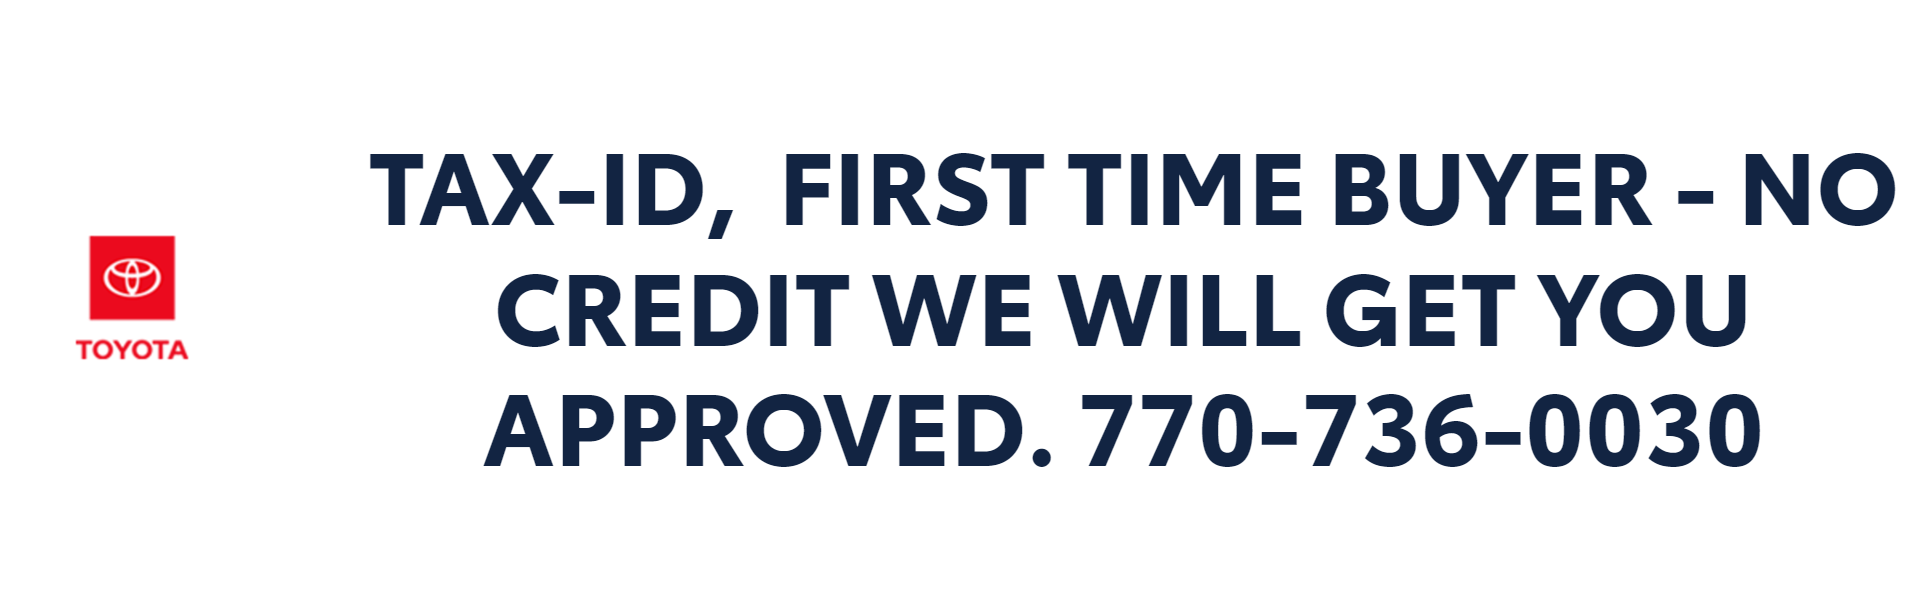 TAX-ID, FIRST TIME BUYER - NO CREDIT WE WILL GET YOU APPROV